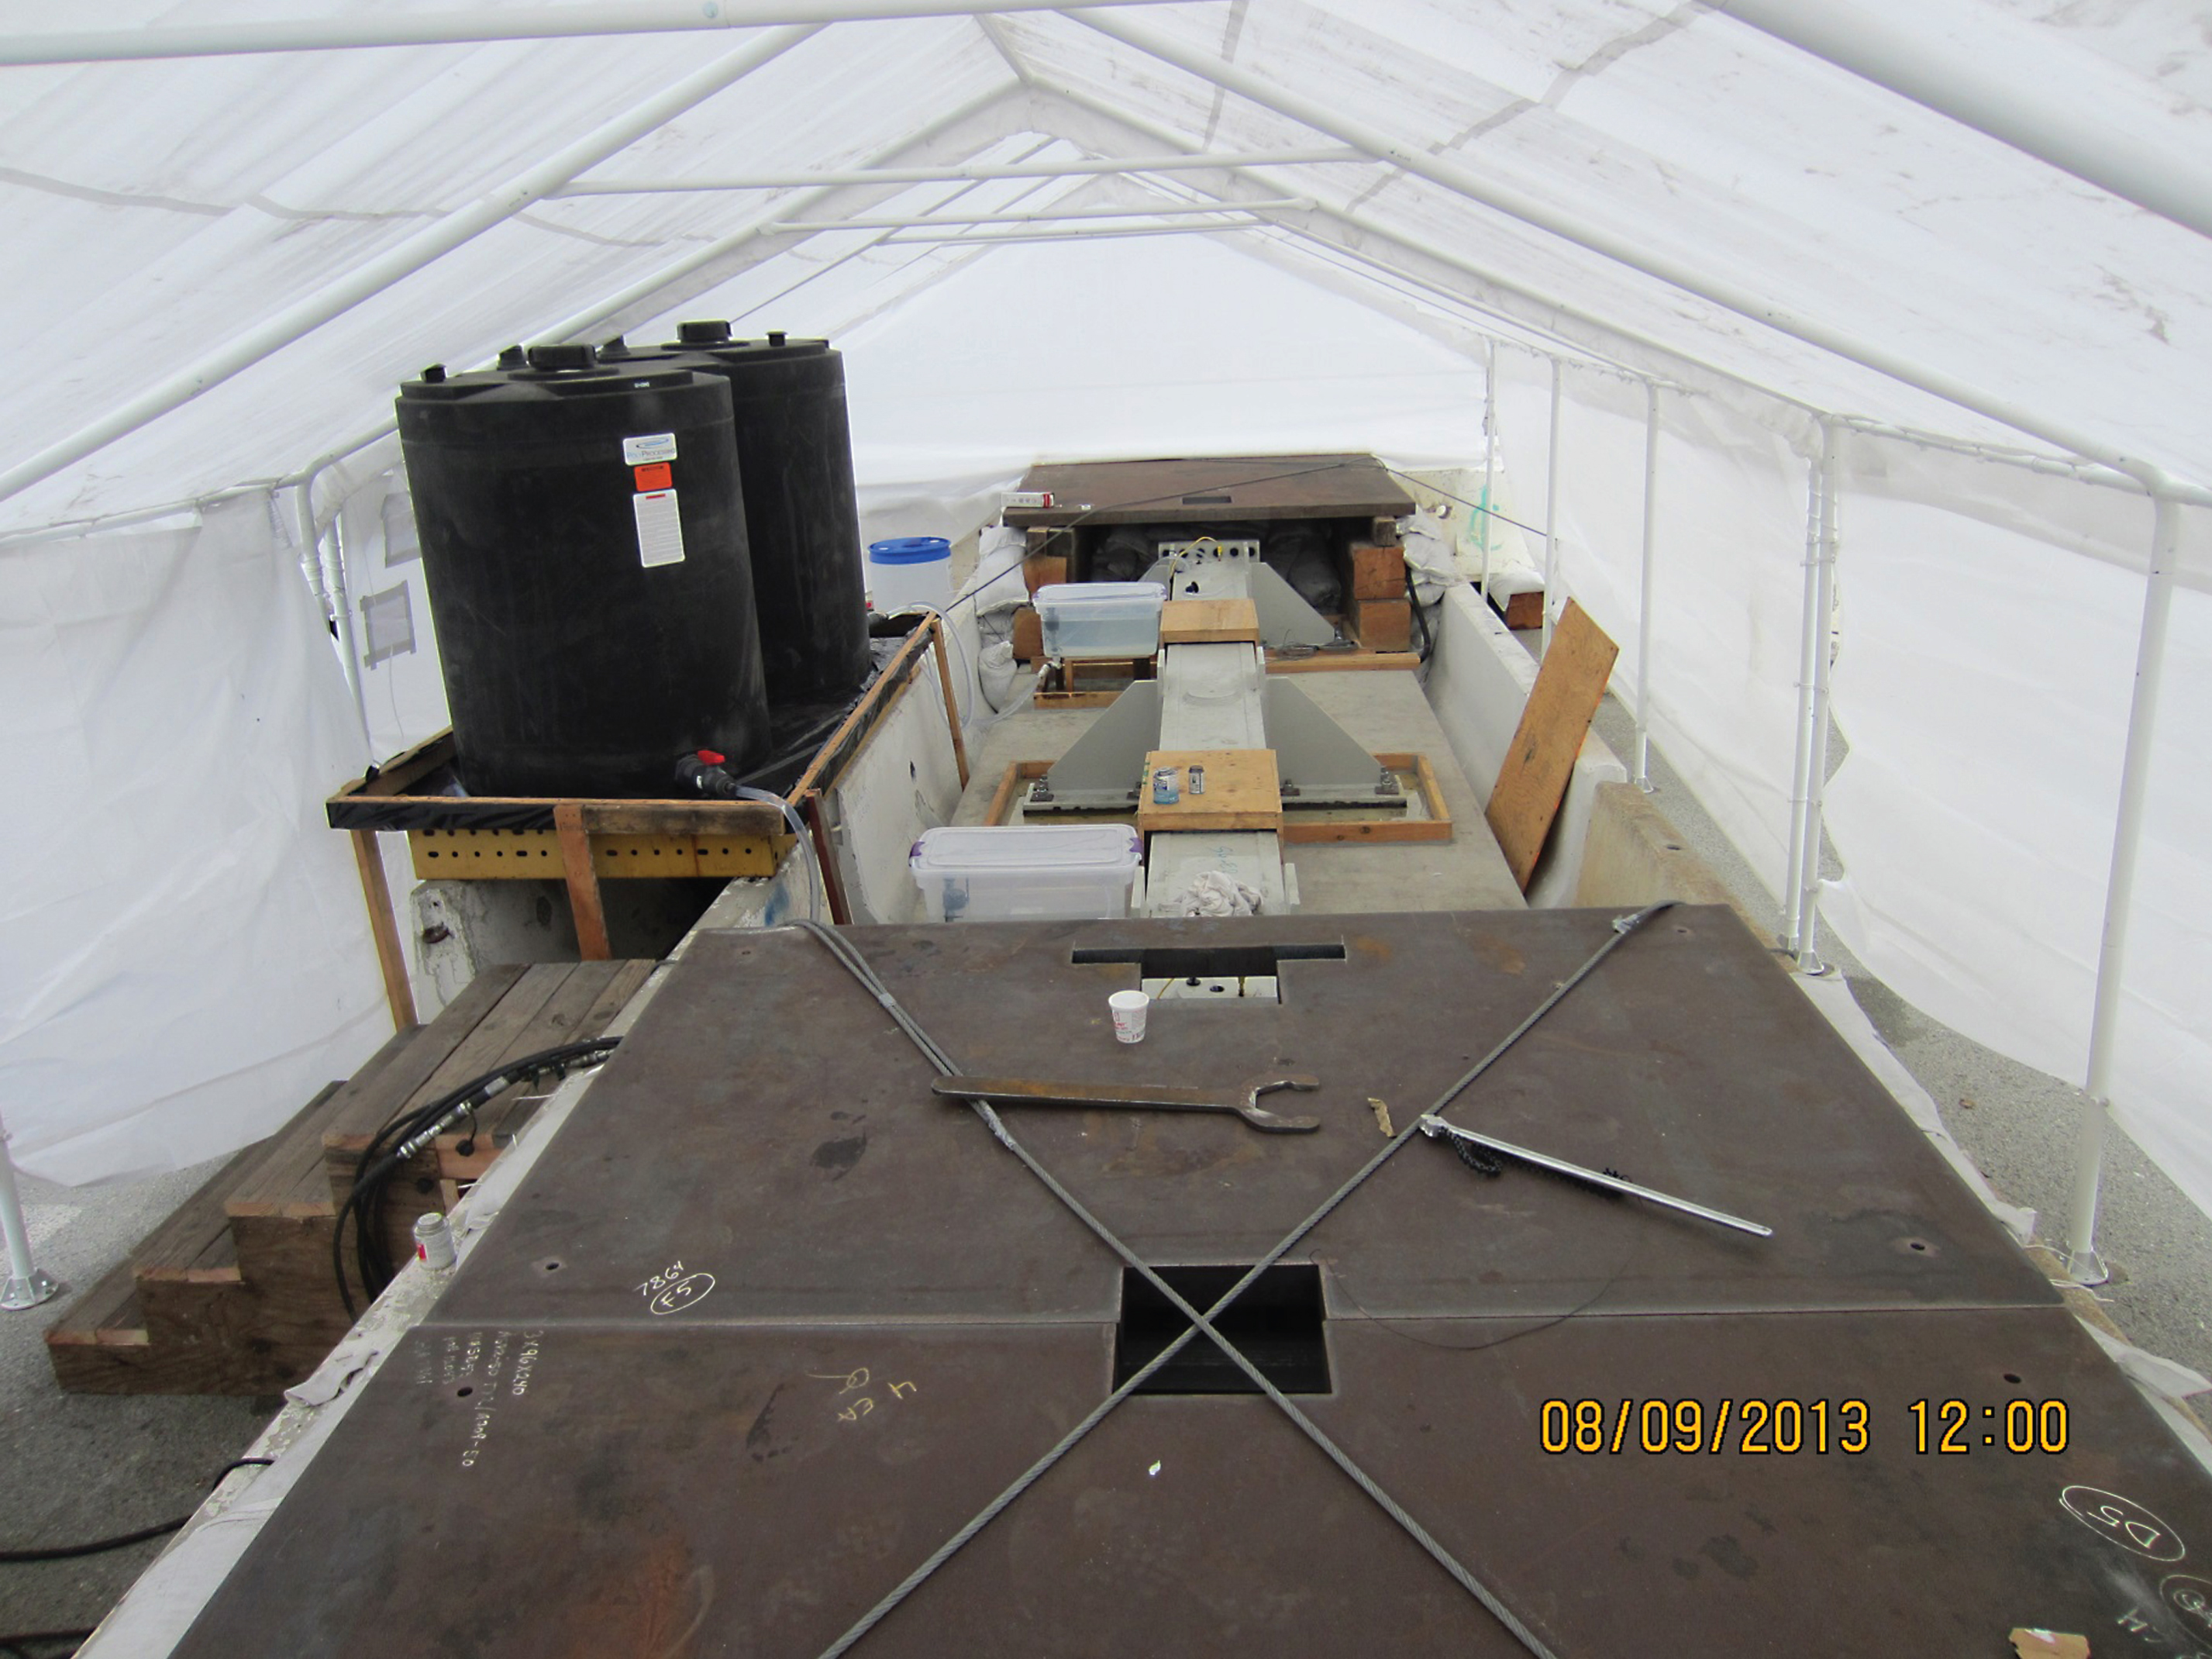 The test in progress under protective tent.